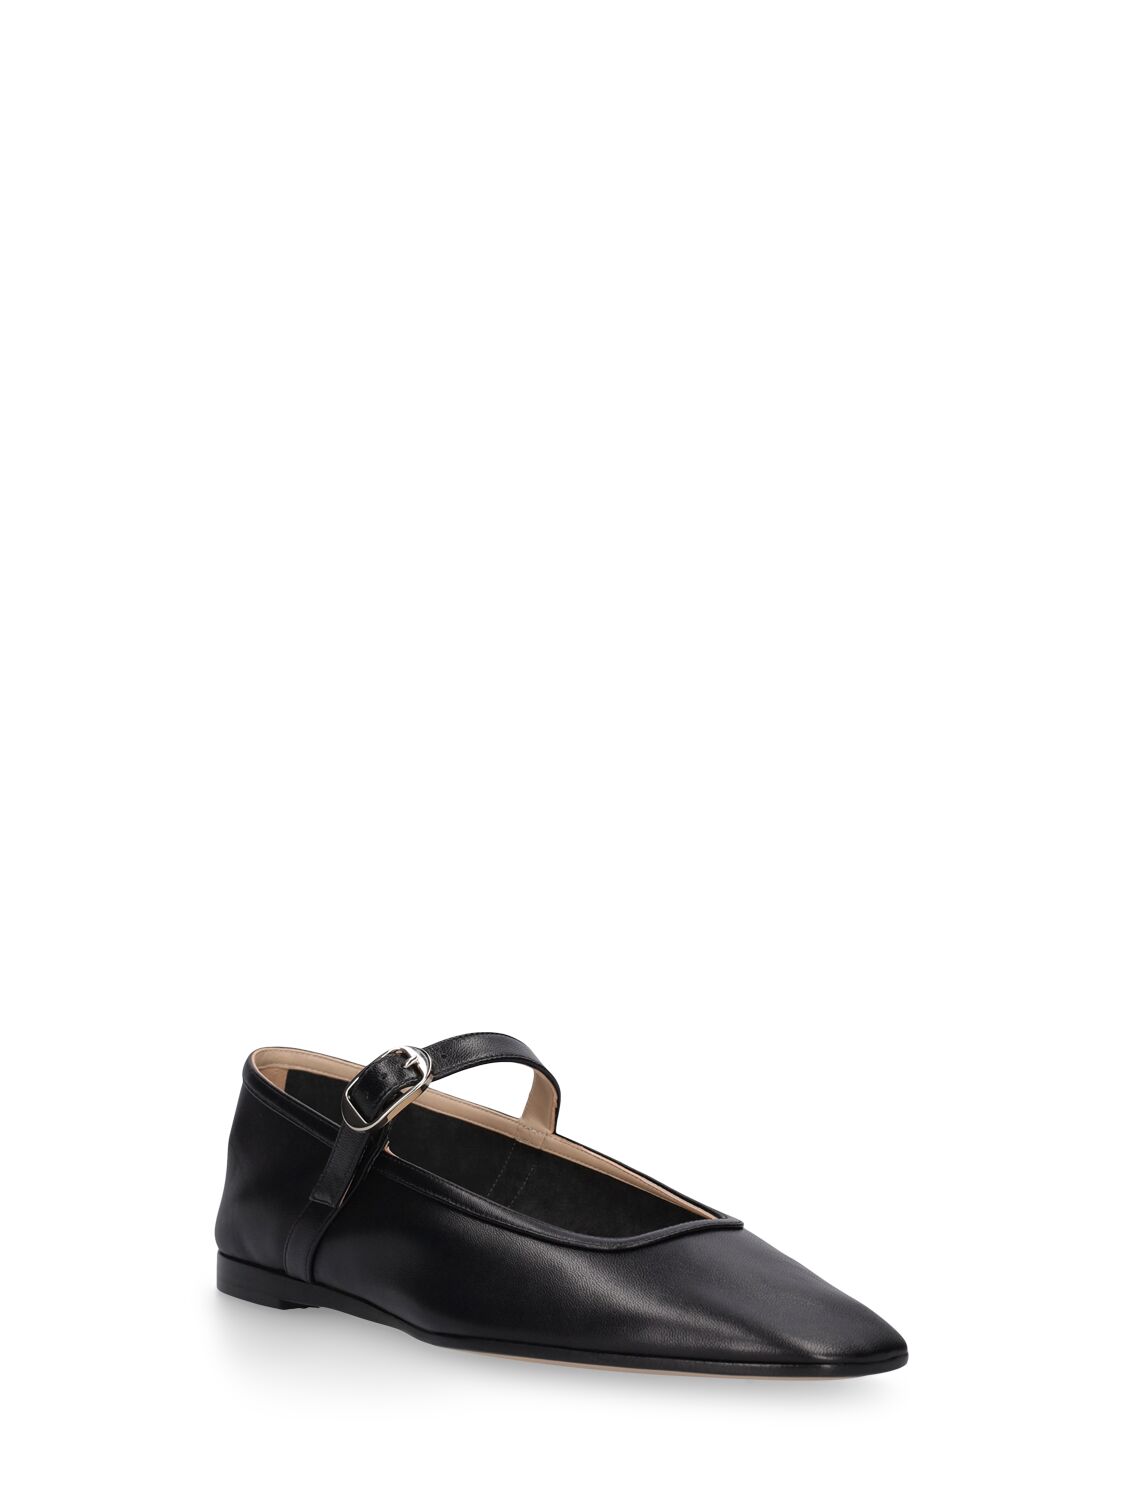 Shop Le Monde Beryl 10mm Leather Mary Jane Ballet Flats In Black